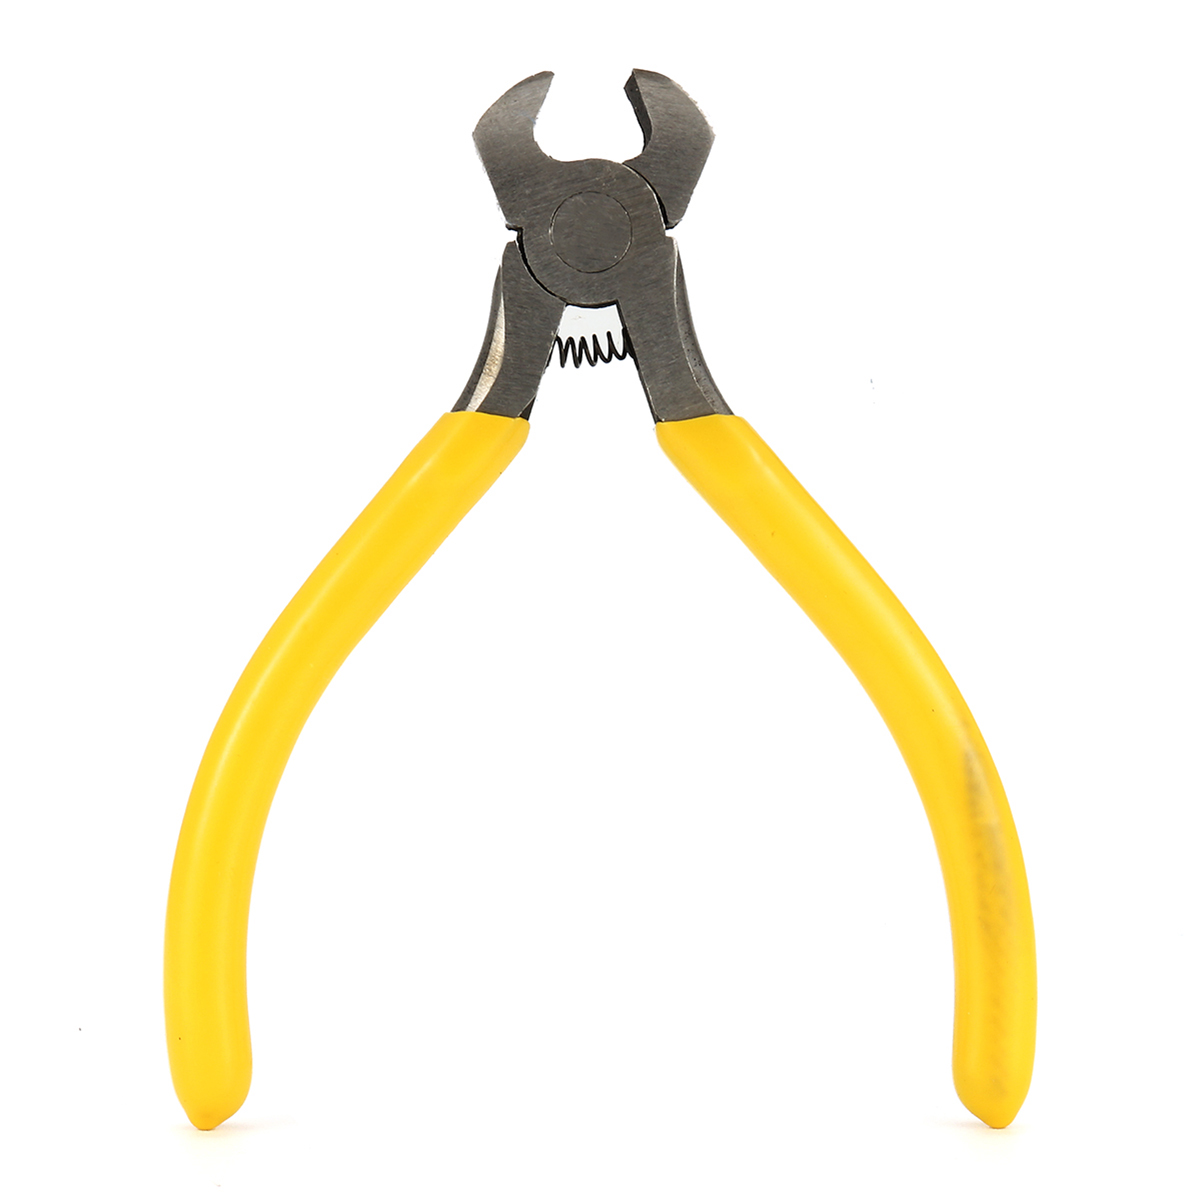 Guitar-Parts-Professional-Fret-Puller-Removal-Plier-Guitar-Bass-Repair-Tool-String-Pliers-Tool-1368383-4